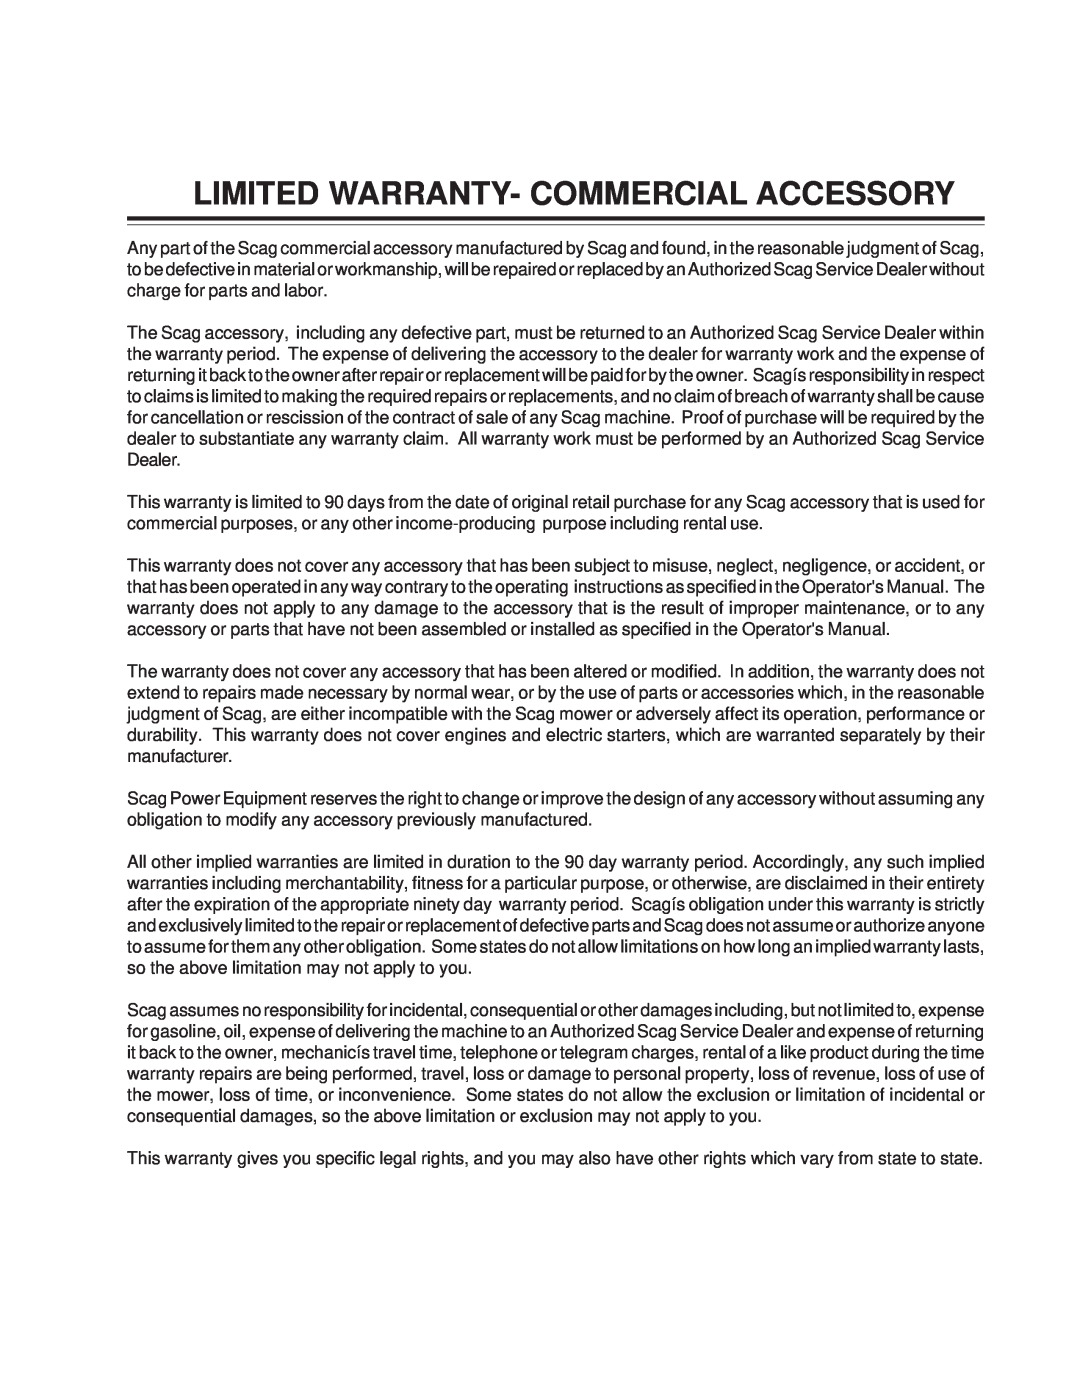 Scag Power Equipment GC-STC manual Limited Warranty- Commercial Accessory 